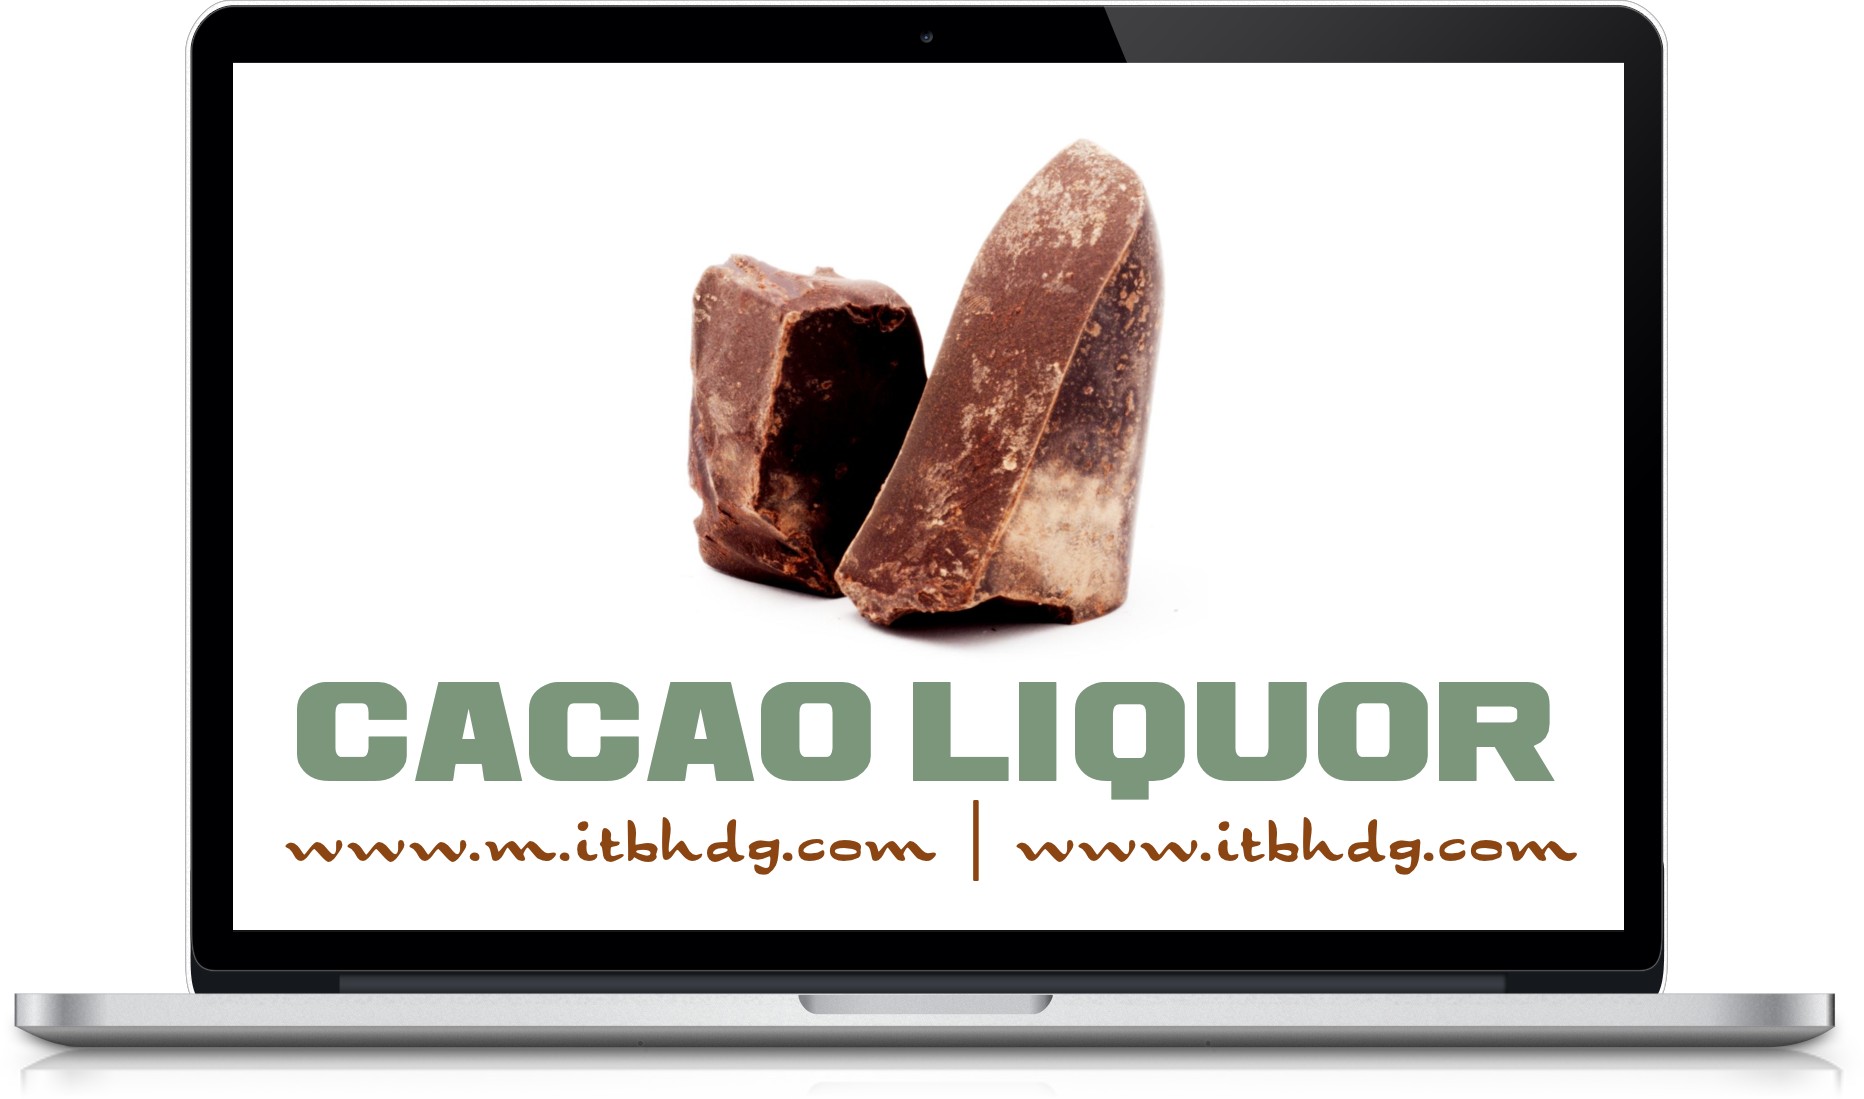 Cacao Liquor | Free Shipping | Shop and Save up to 35% today | www.m.itbhdg.com | www.itbhdg.com